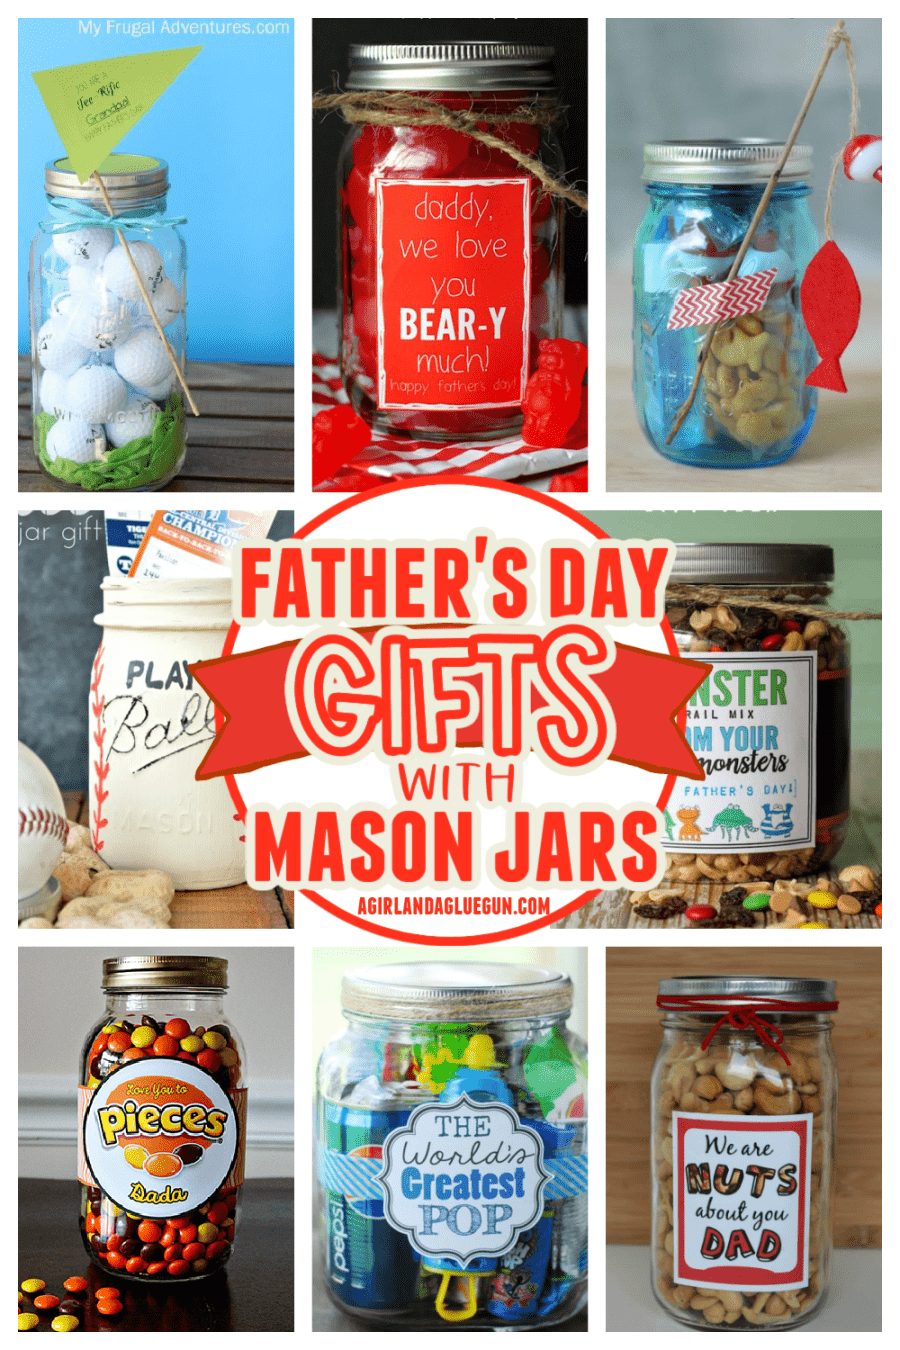 father's day gifts with mason jars! cute present ideas for dads